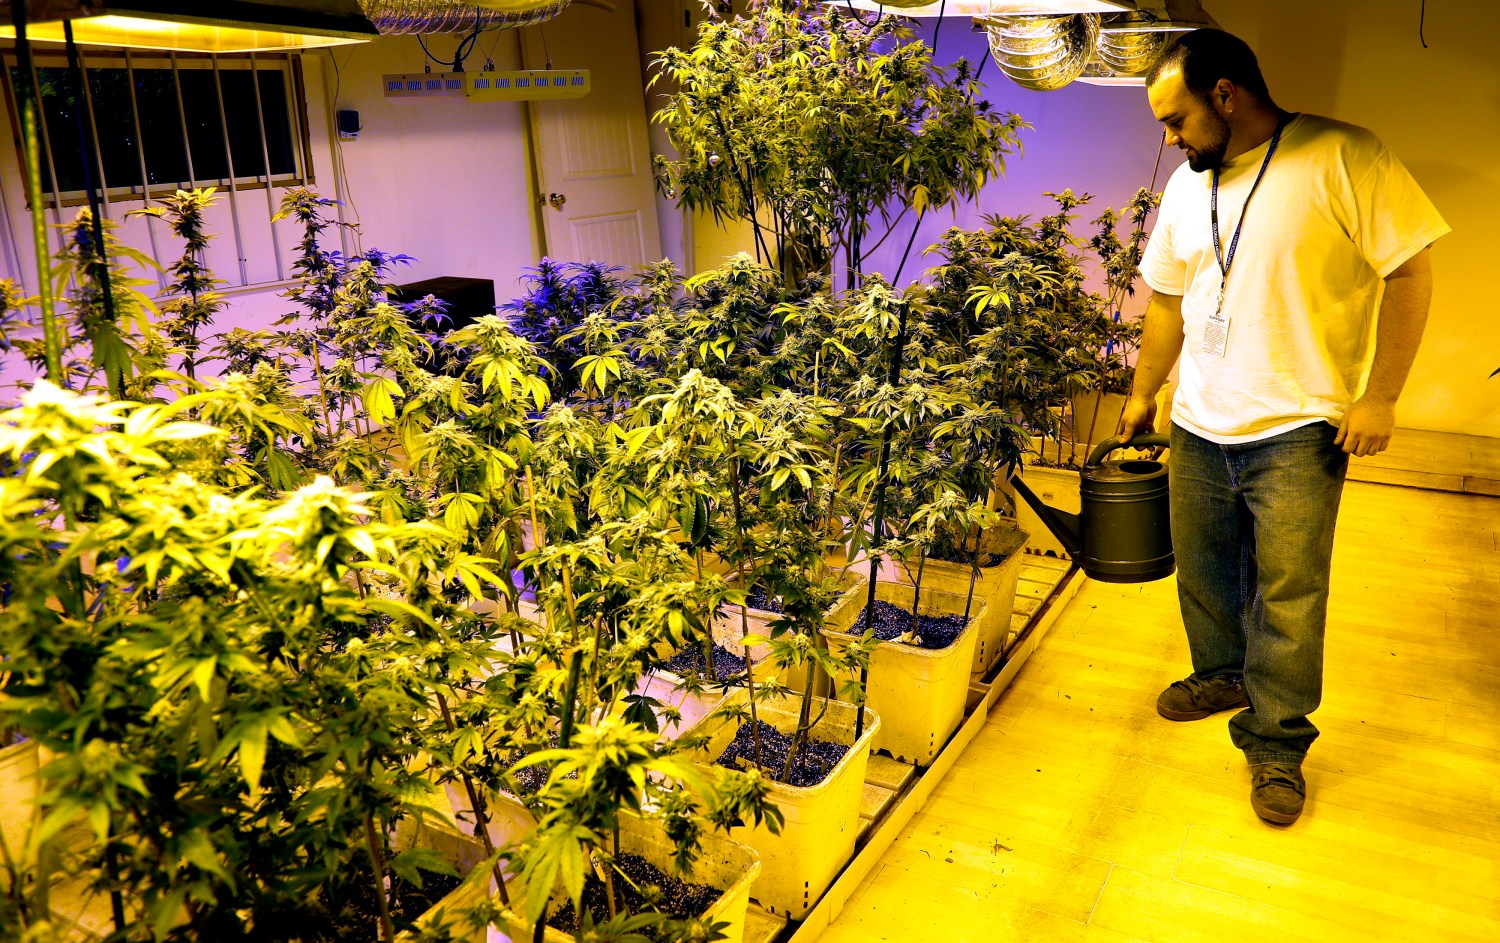 Joe Rey, a grower at 3D Cannabis Center, waters marijuana plants at the company facility in Denver December 31, 2013. Proprietors of the first marijuana retailers licensed to sell pot for recreational use in Colorado, including 3D, were busy rolling joints and stocking shelves with their leafy merchandise on Tuesday, ahead of a New Year's Day grand opening that marks a new chapter in America's drug culture. REUTERS/Rick Wilking (UNITED STATES - Tags: BUSINESS SOCIETY POLITICS DRUGS) - GM1EA110GX401